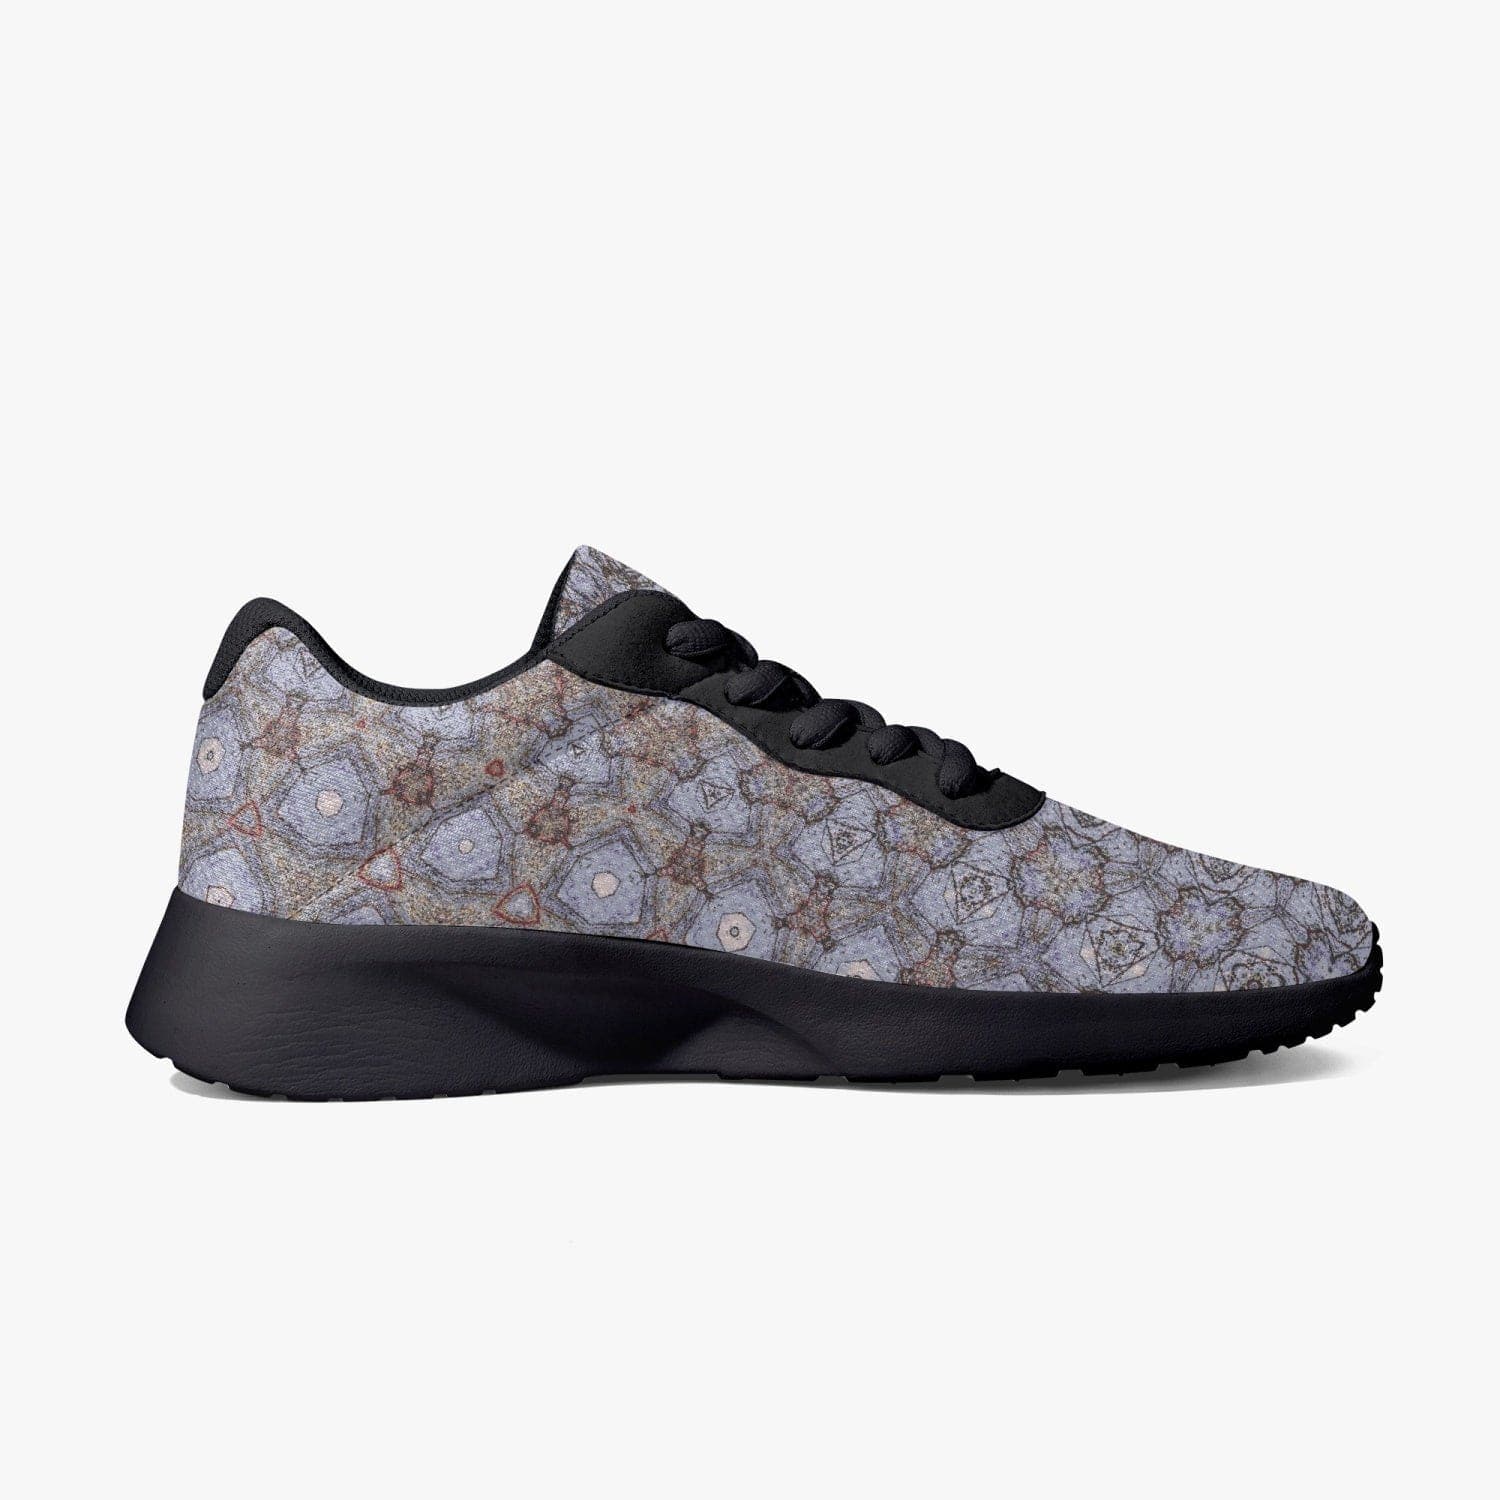 Sensus Design All Year Round Mauve Breathable Mesh Lifestyle Unisex Mesh Running Shoes for Daily Style or Outside Exercise (Black soles), designed by Sensus Studio Design